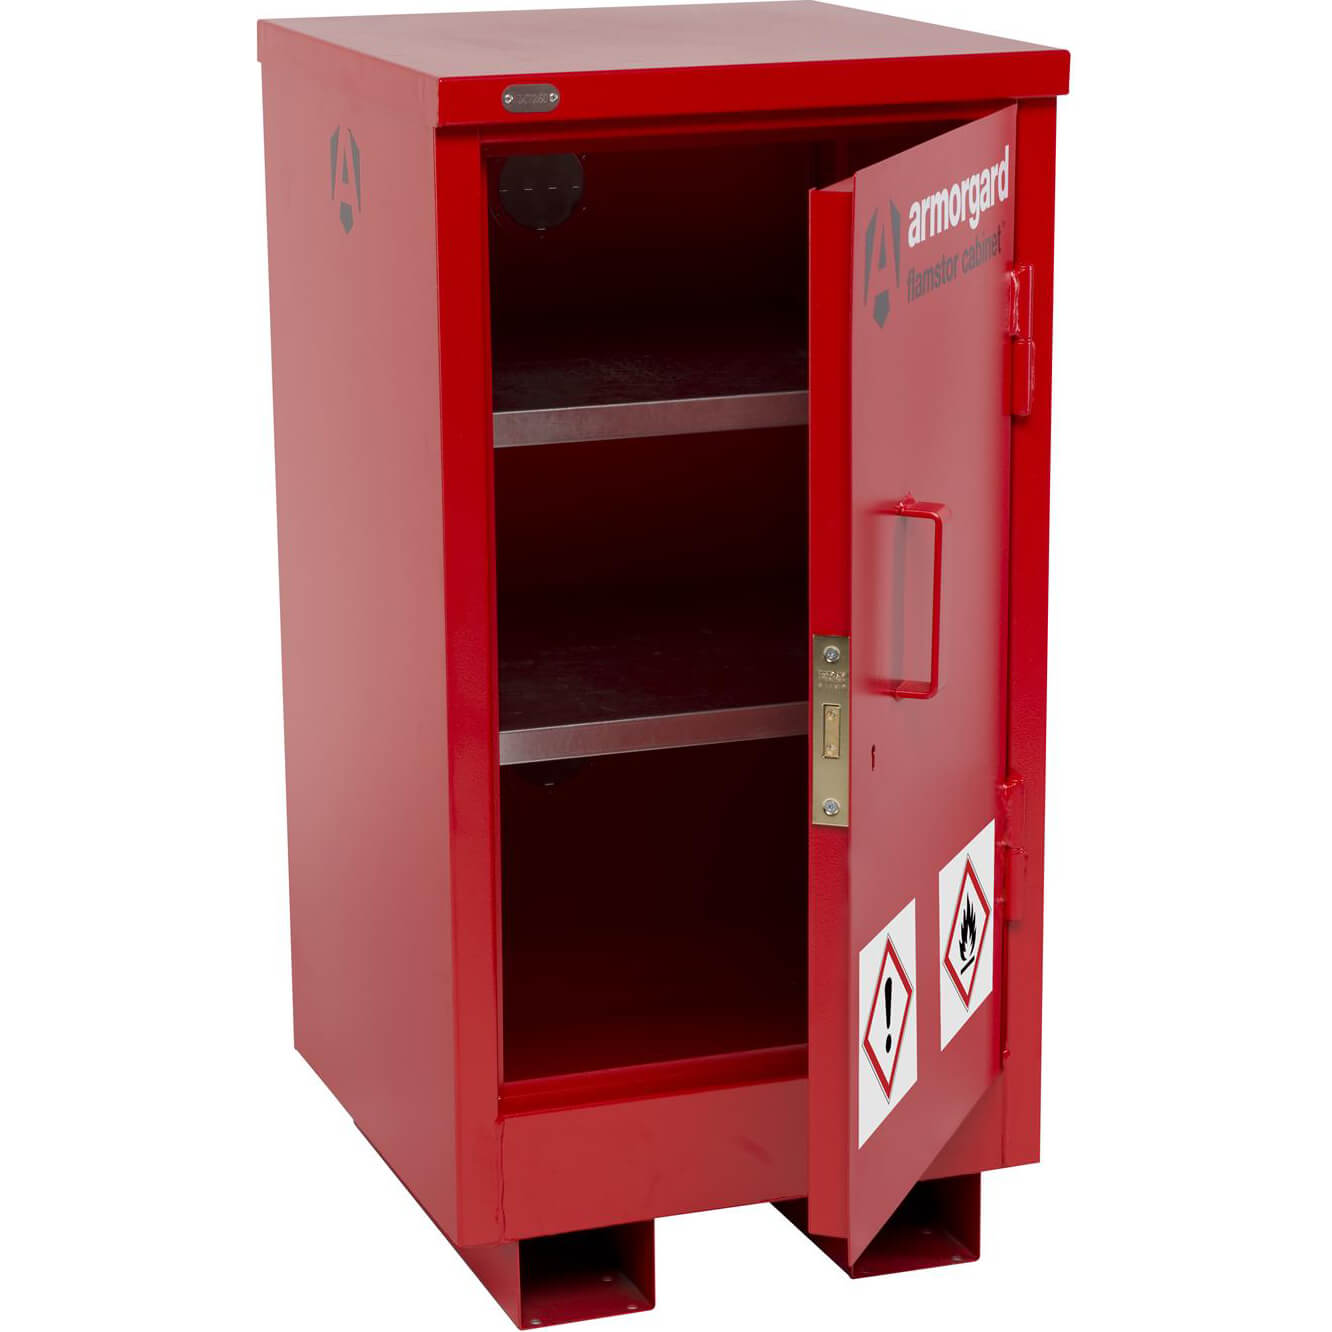 Photo of Armorgard Flamstor Chemical And Flammables Hazardous Cabinet 500mm 530mm 980mm